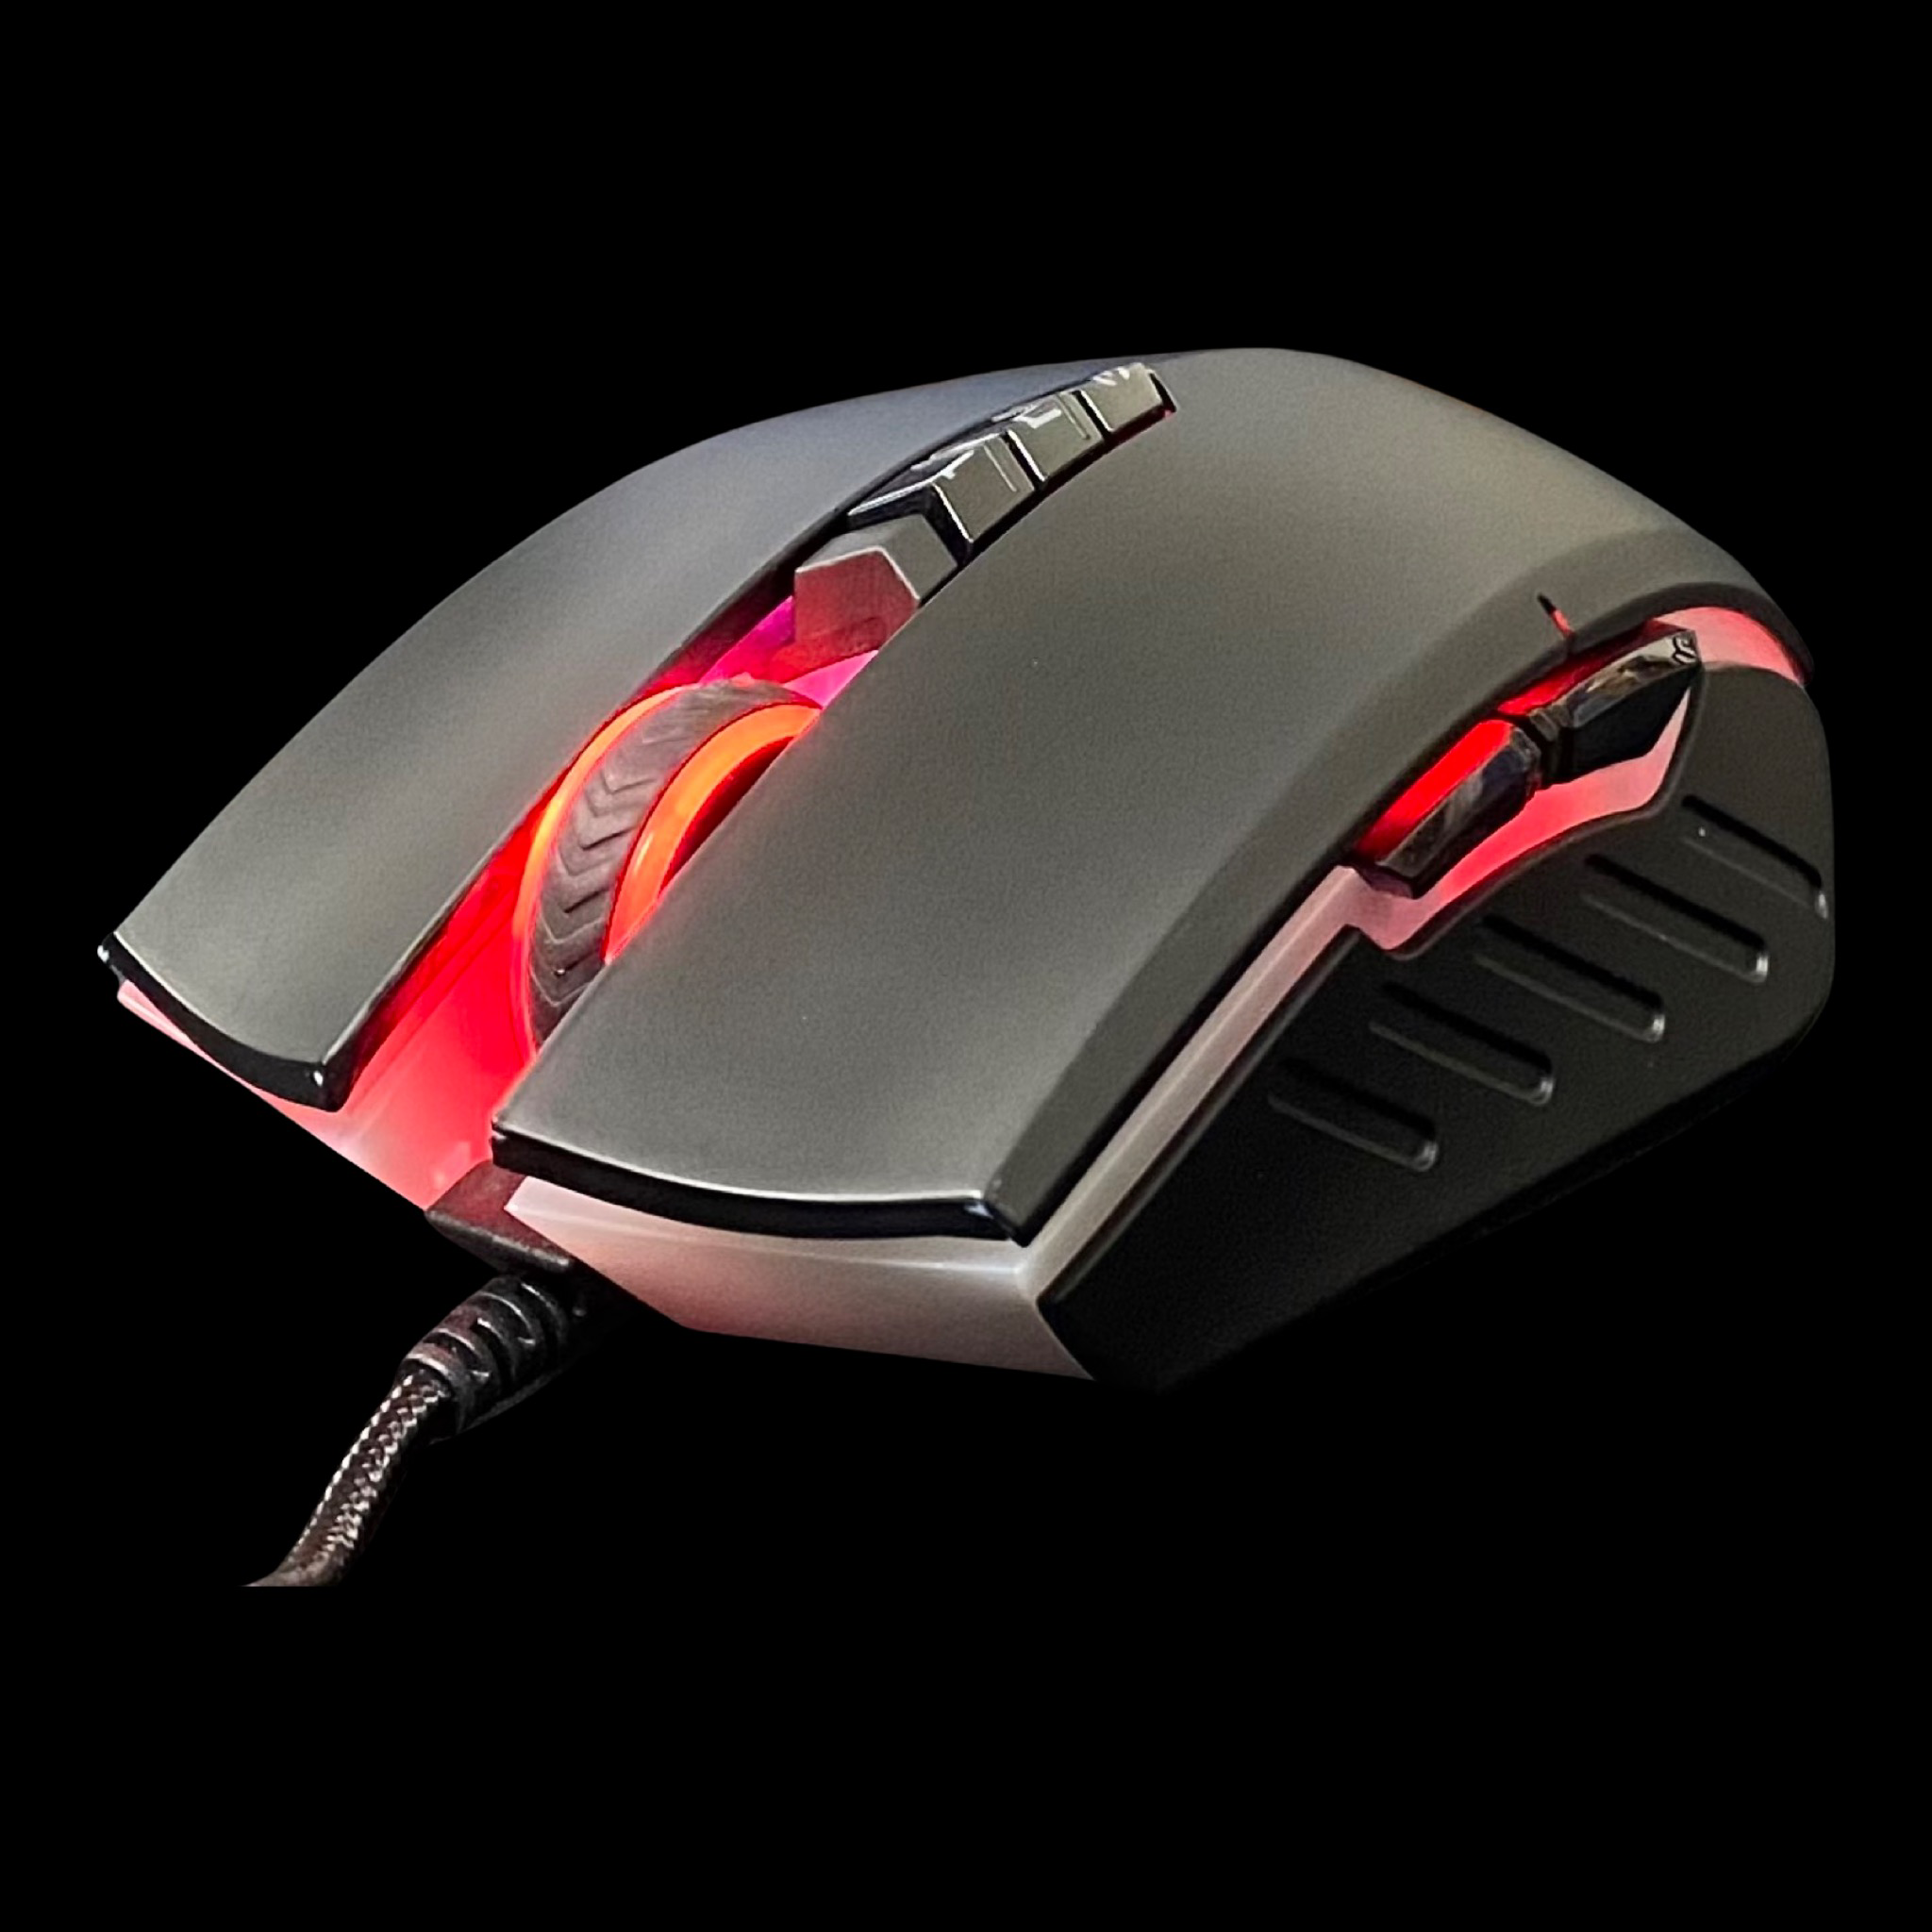 Bloody ABedless A70x Matte Black Gaming Mouse